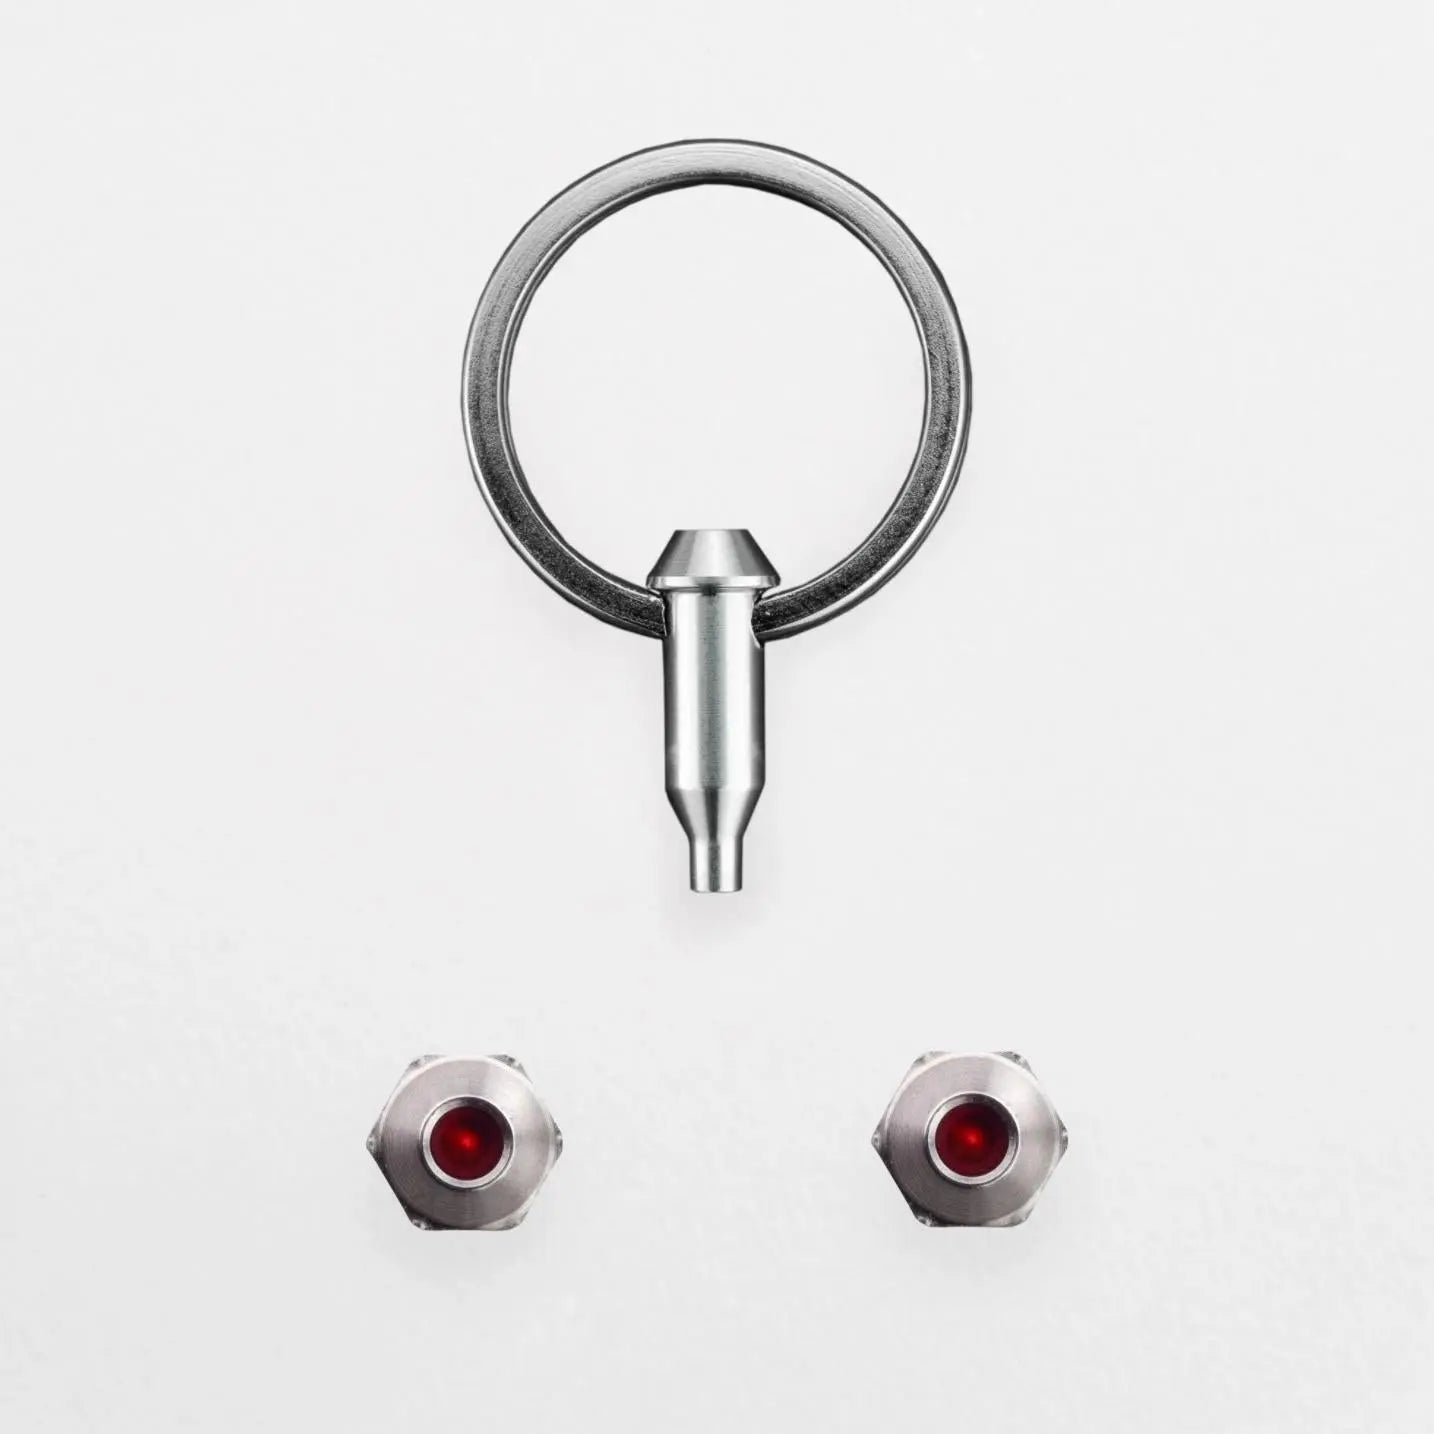 Hexlox Security Bolt Sets for Wabi Bicycles and Wheels-Wabi Cycles